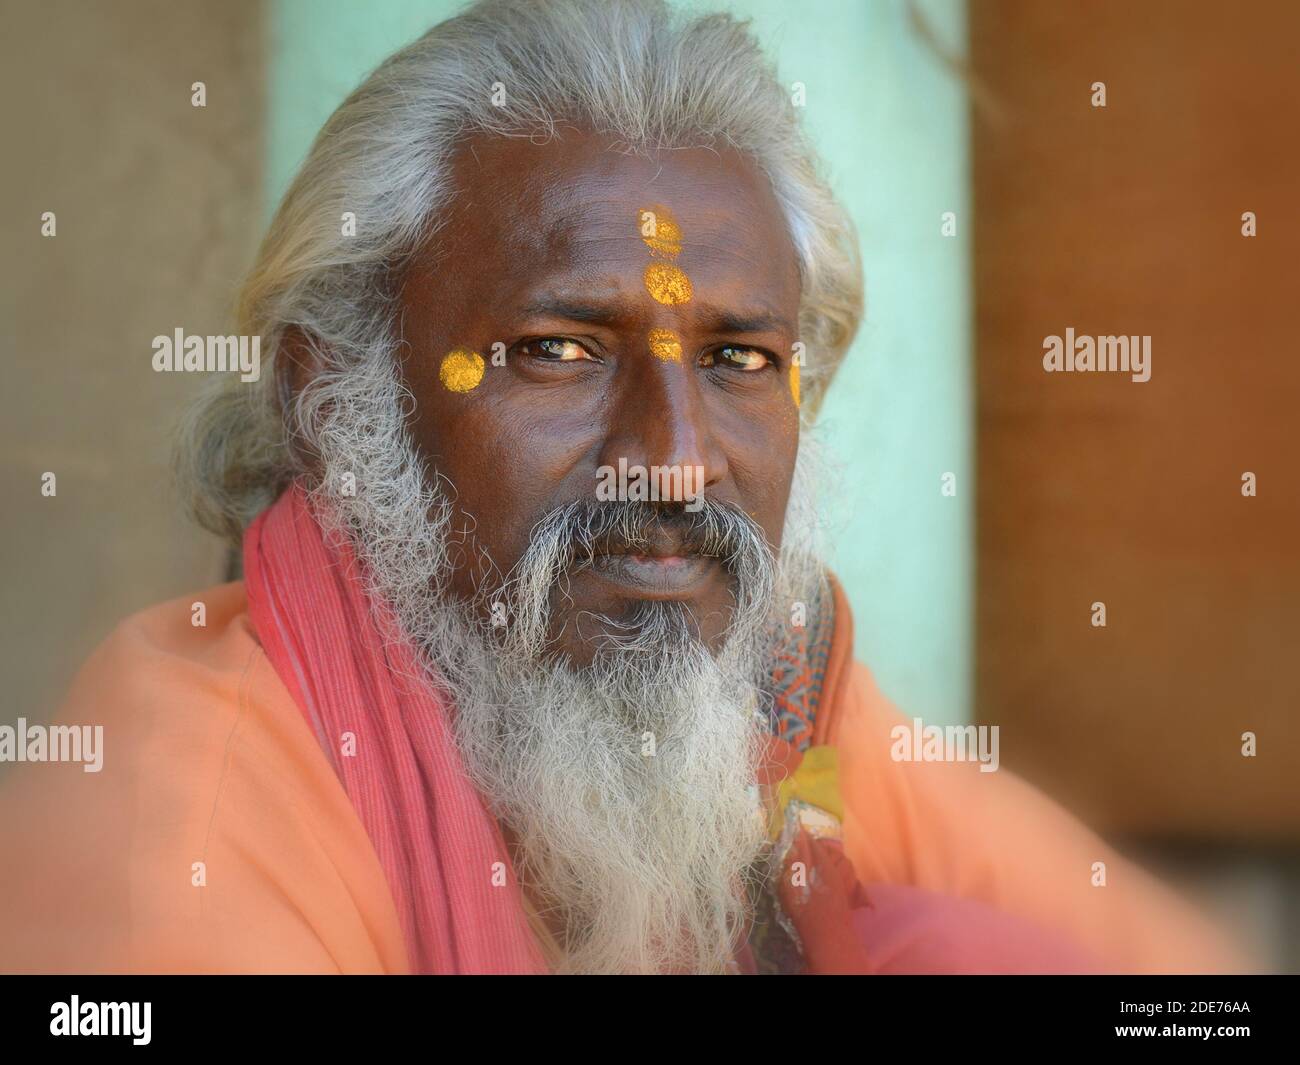 Middle-aged Indian Hindu sadhu (guru, baba) with three yellow tilaka marks on his forehead, one above the other, looks at the camera. Stock Photo